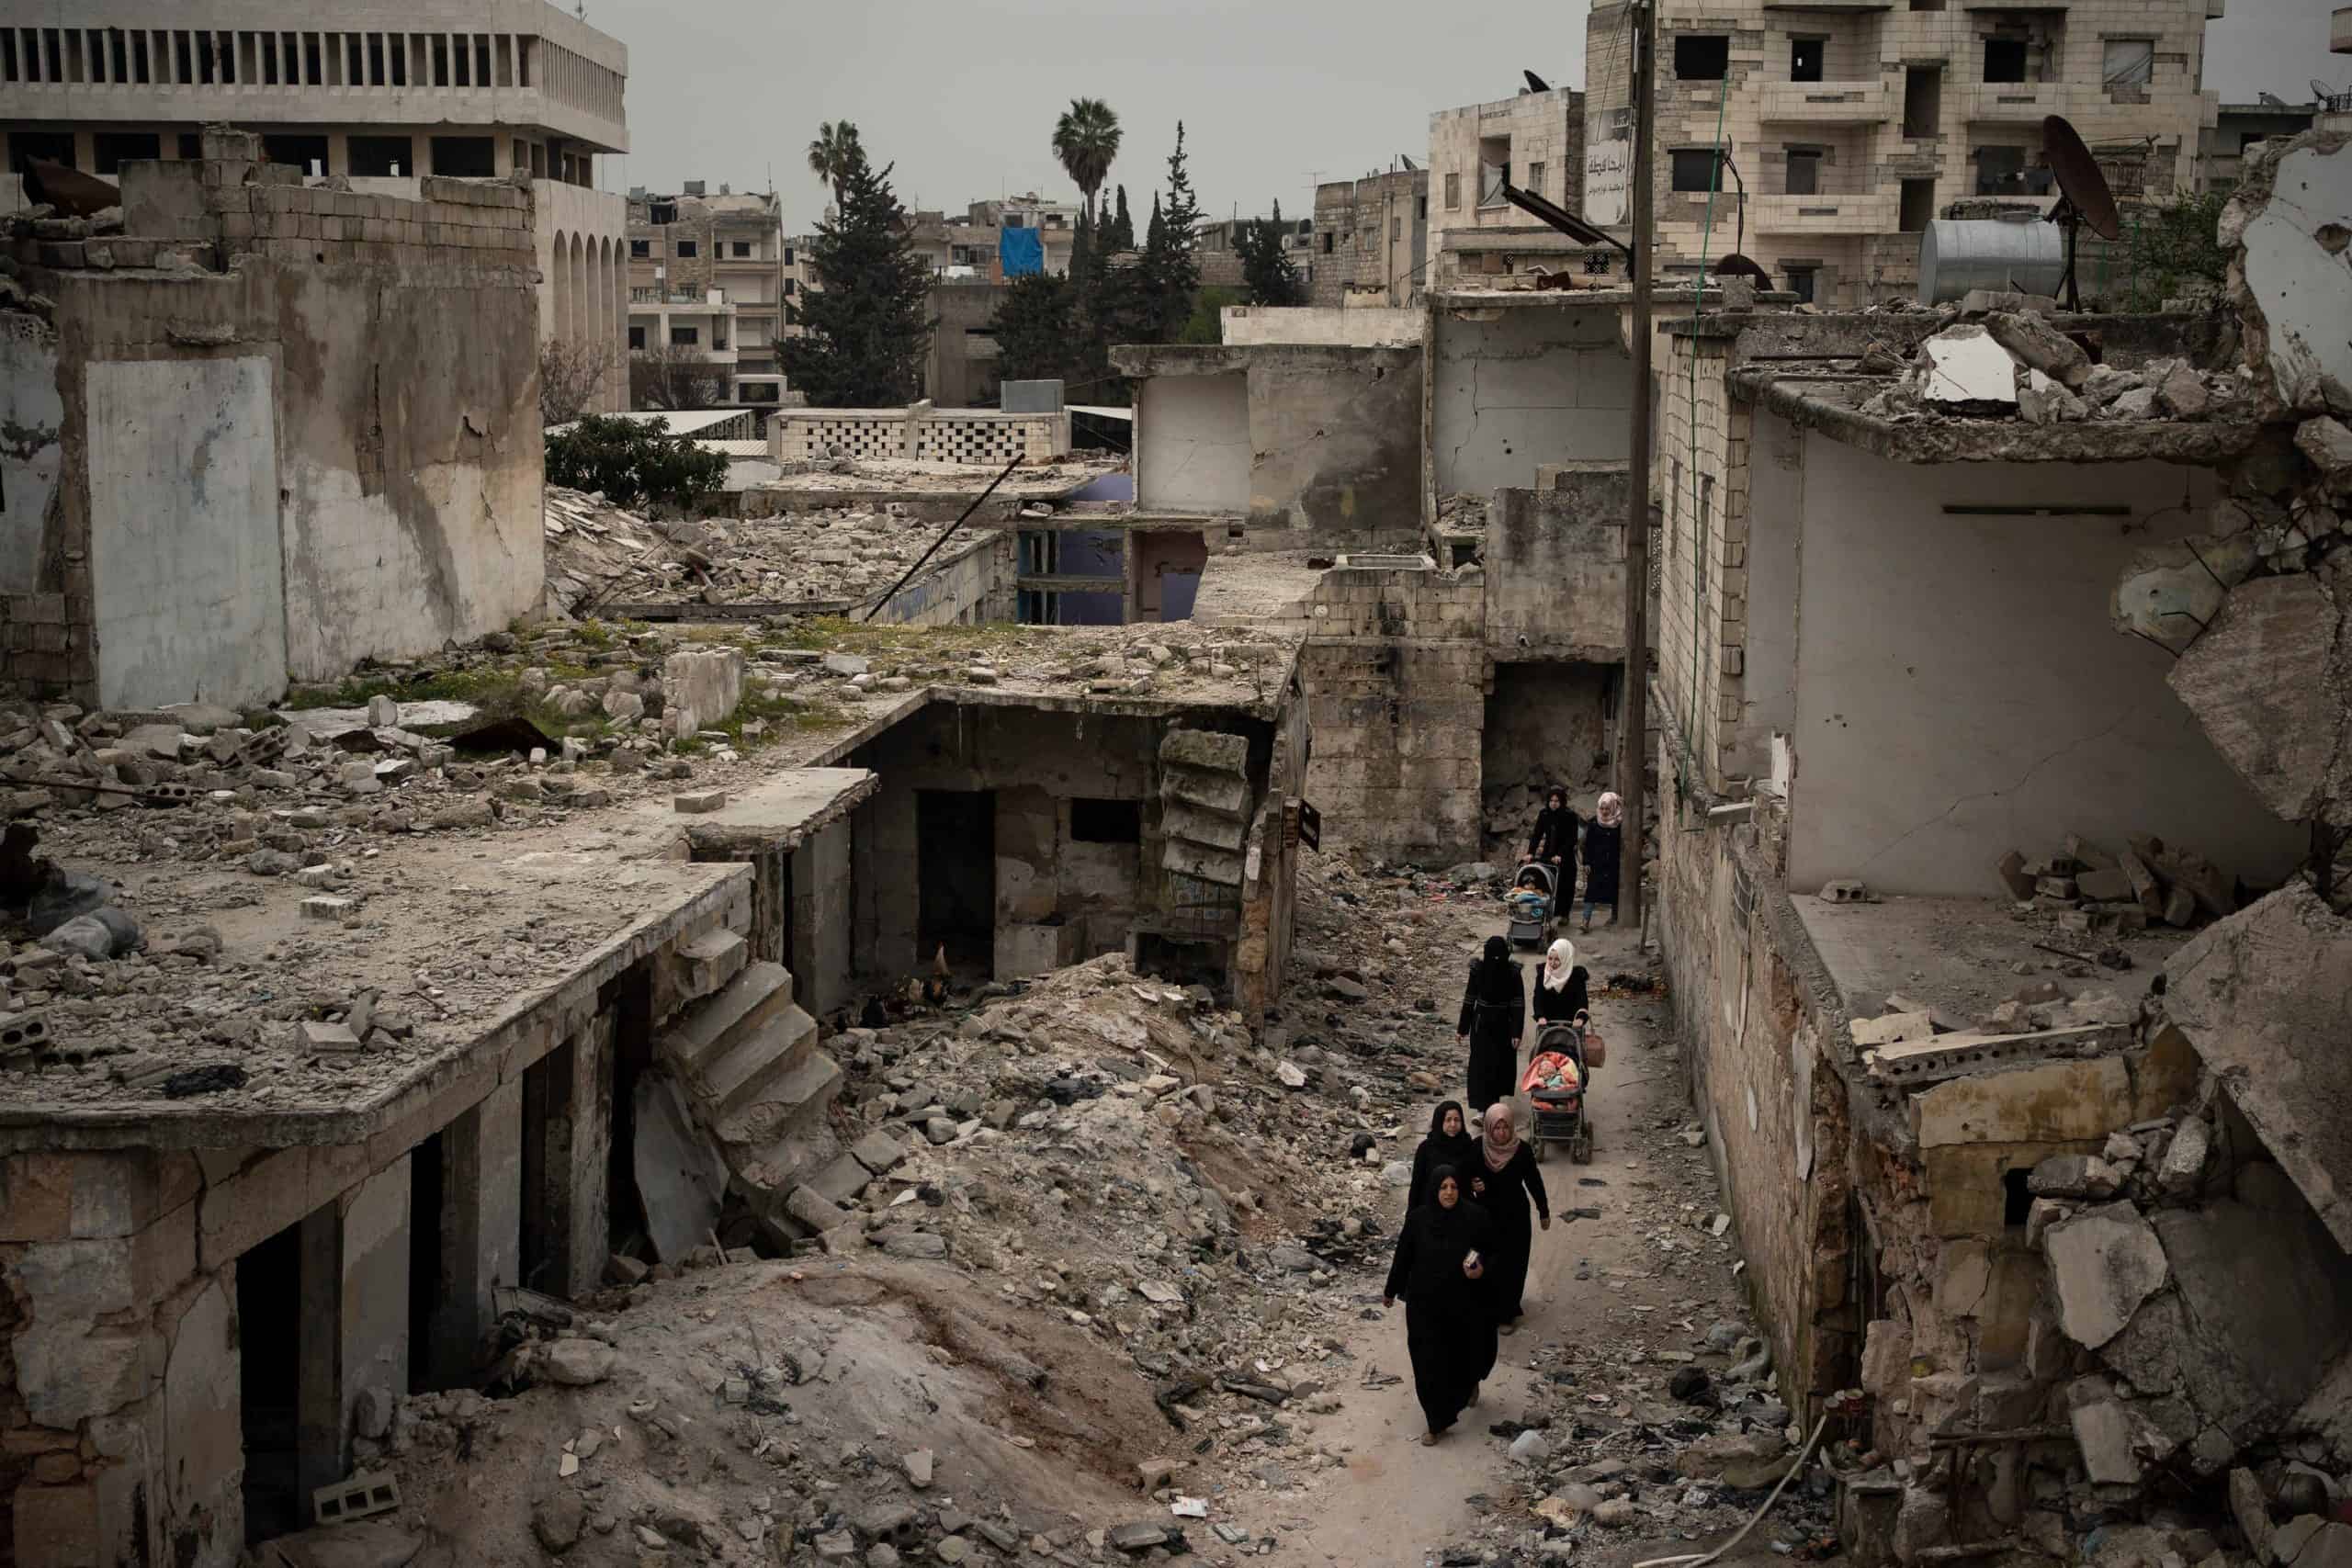 10 years on from the start of its uprising, Syrians struggle on in dire poverty